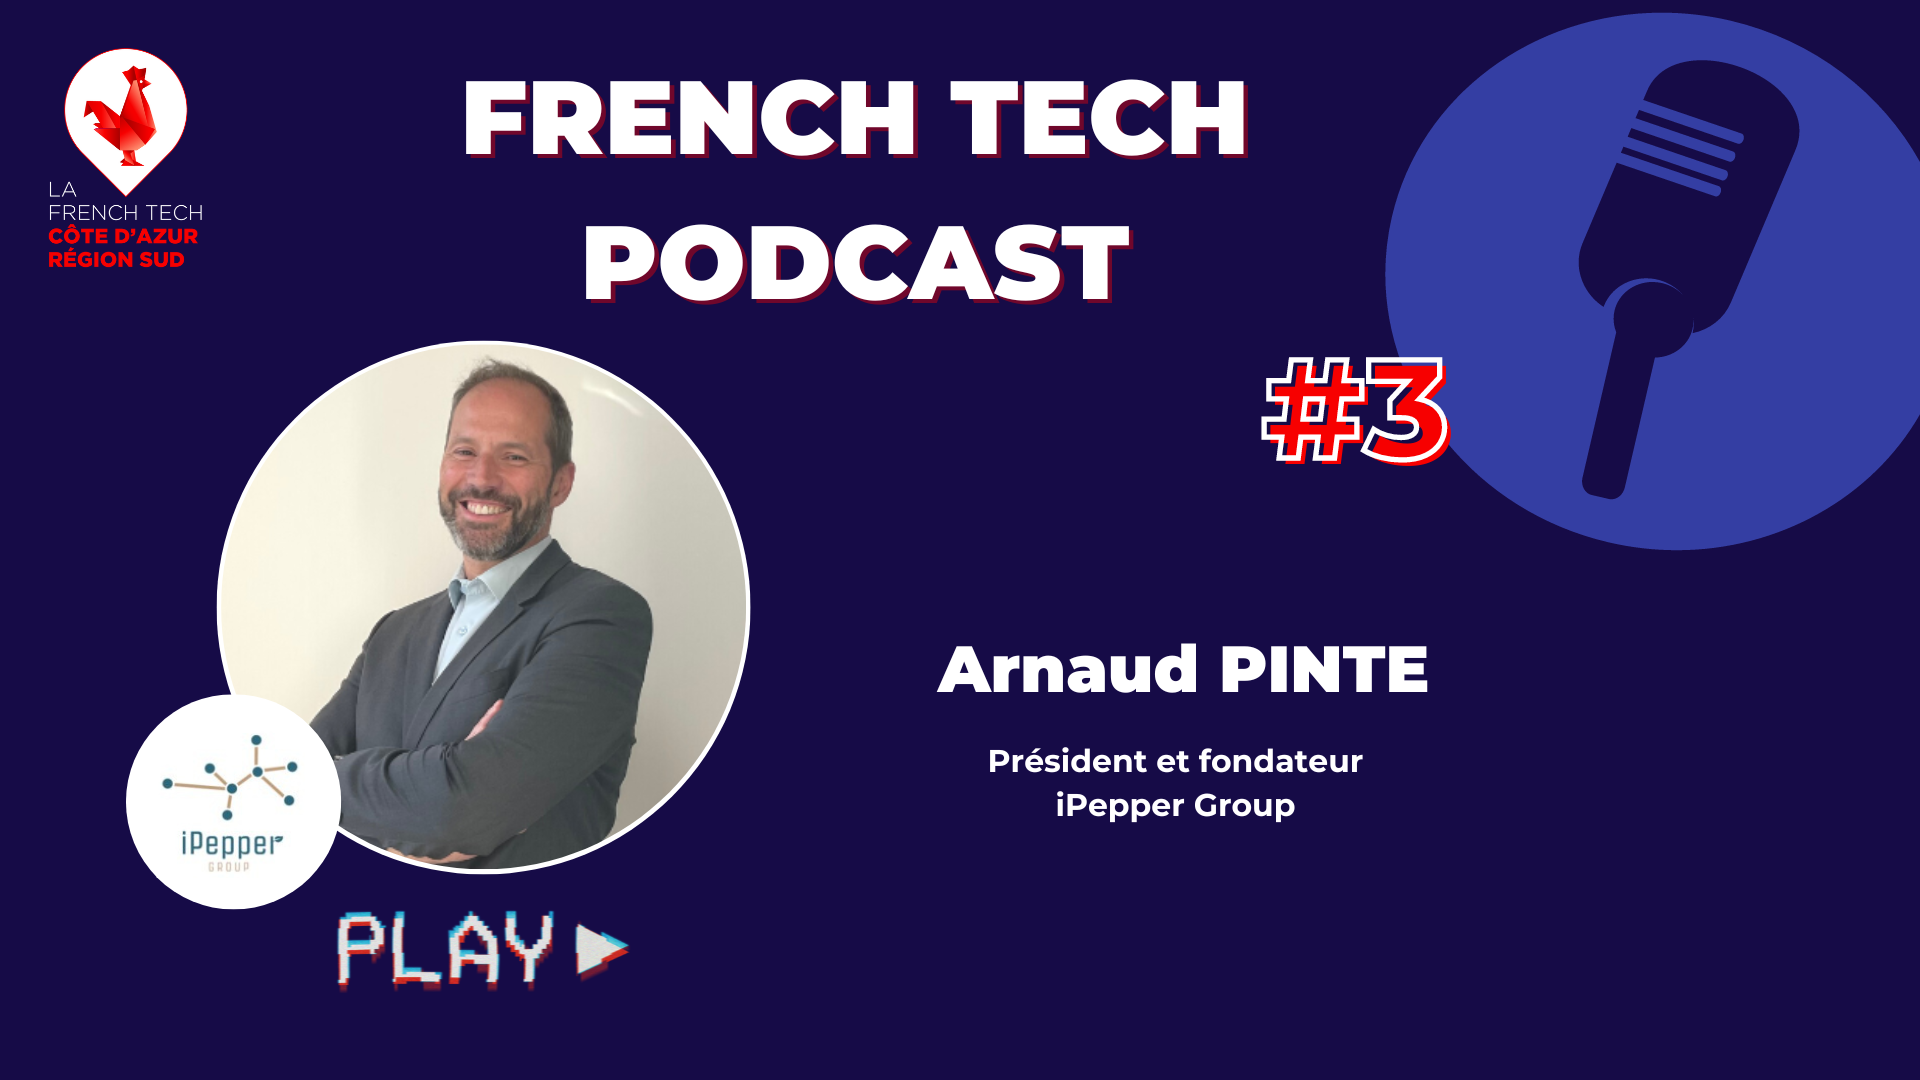 French Tech Podcast #3 Arnaud Pinte de iPepper Group